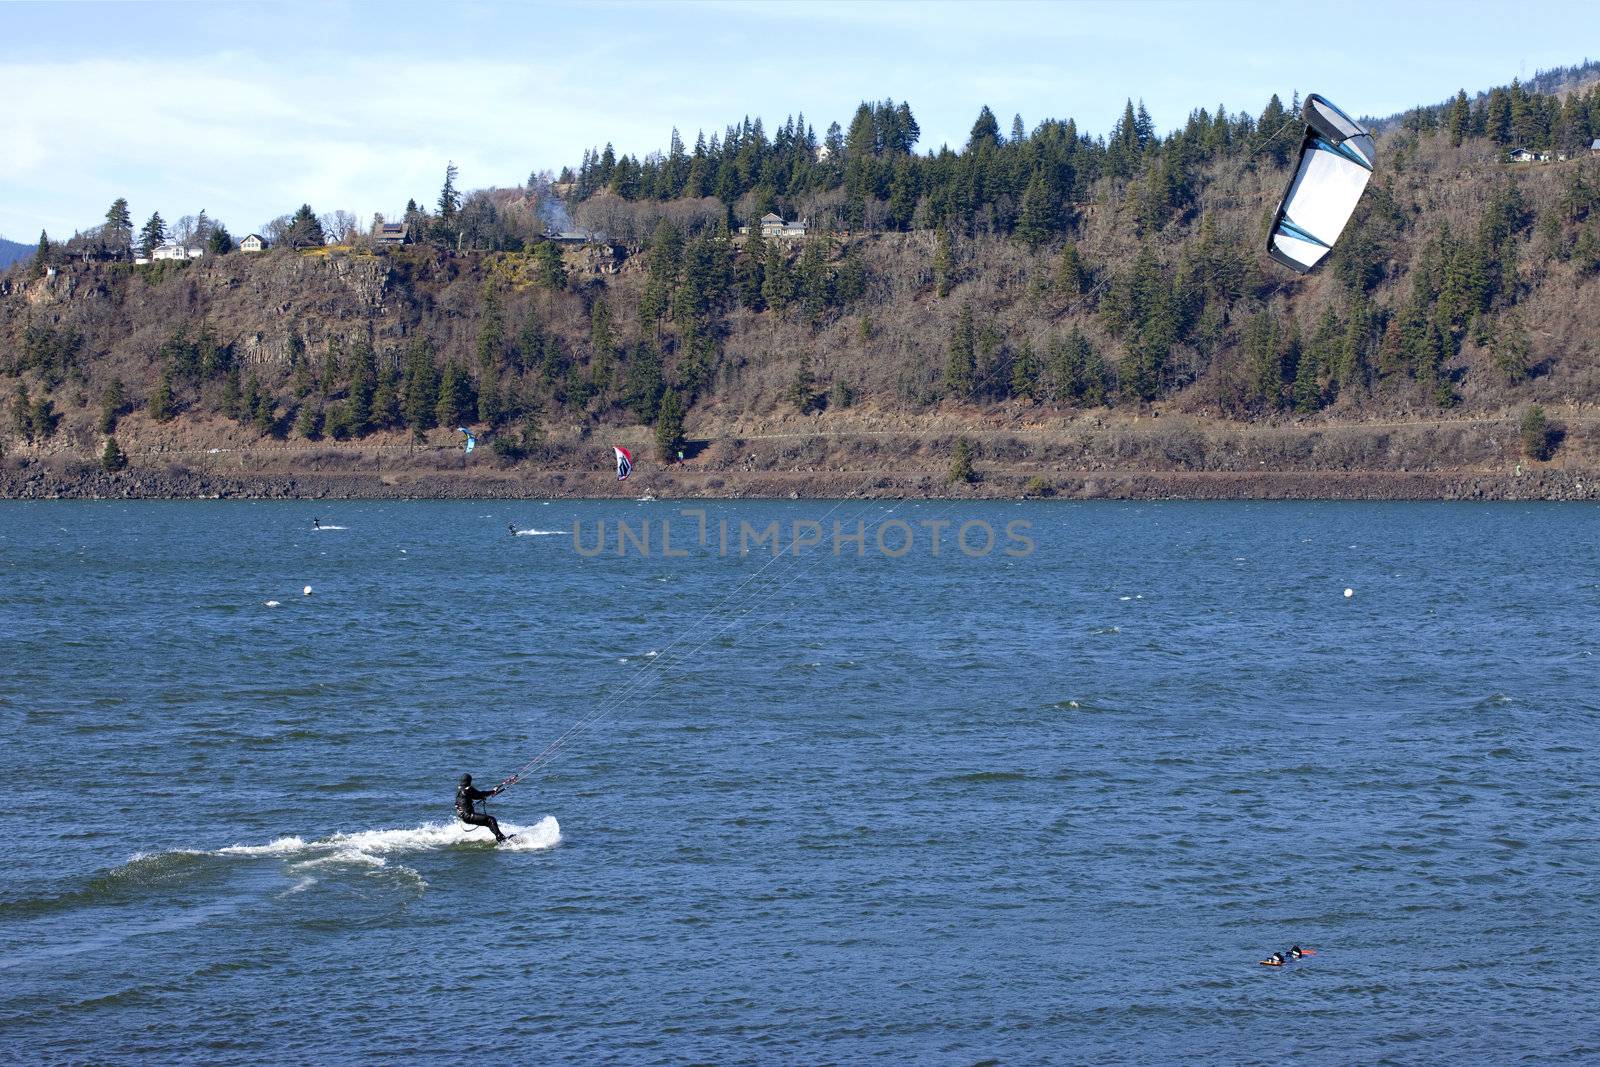 Wind surfing on the Columbia River, Hood River OR. by Rigucci